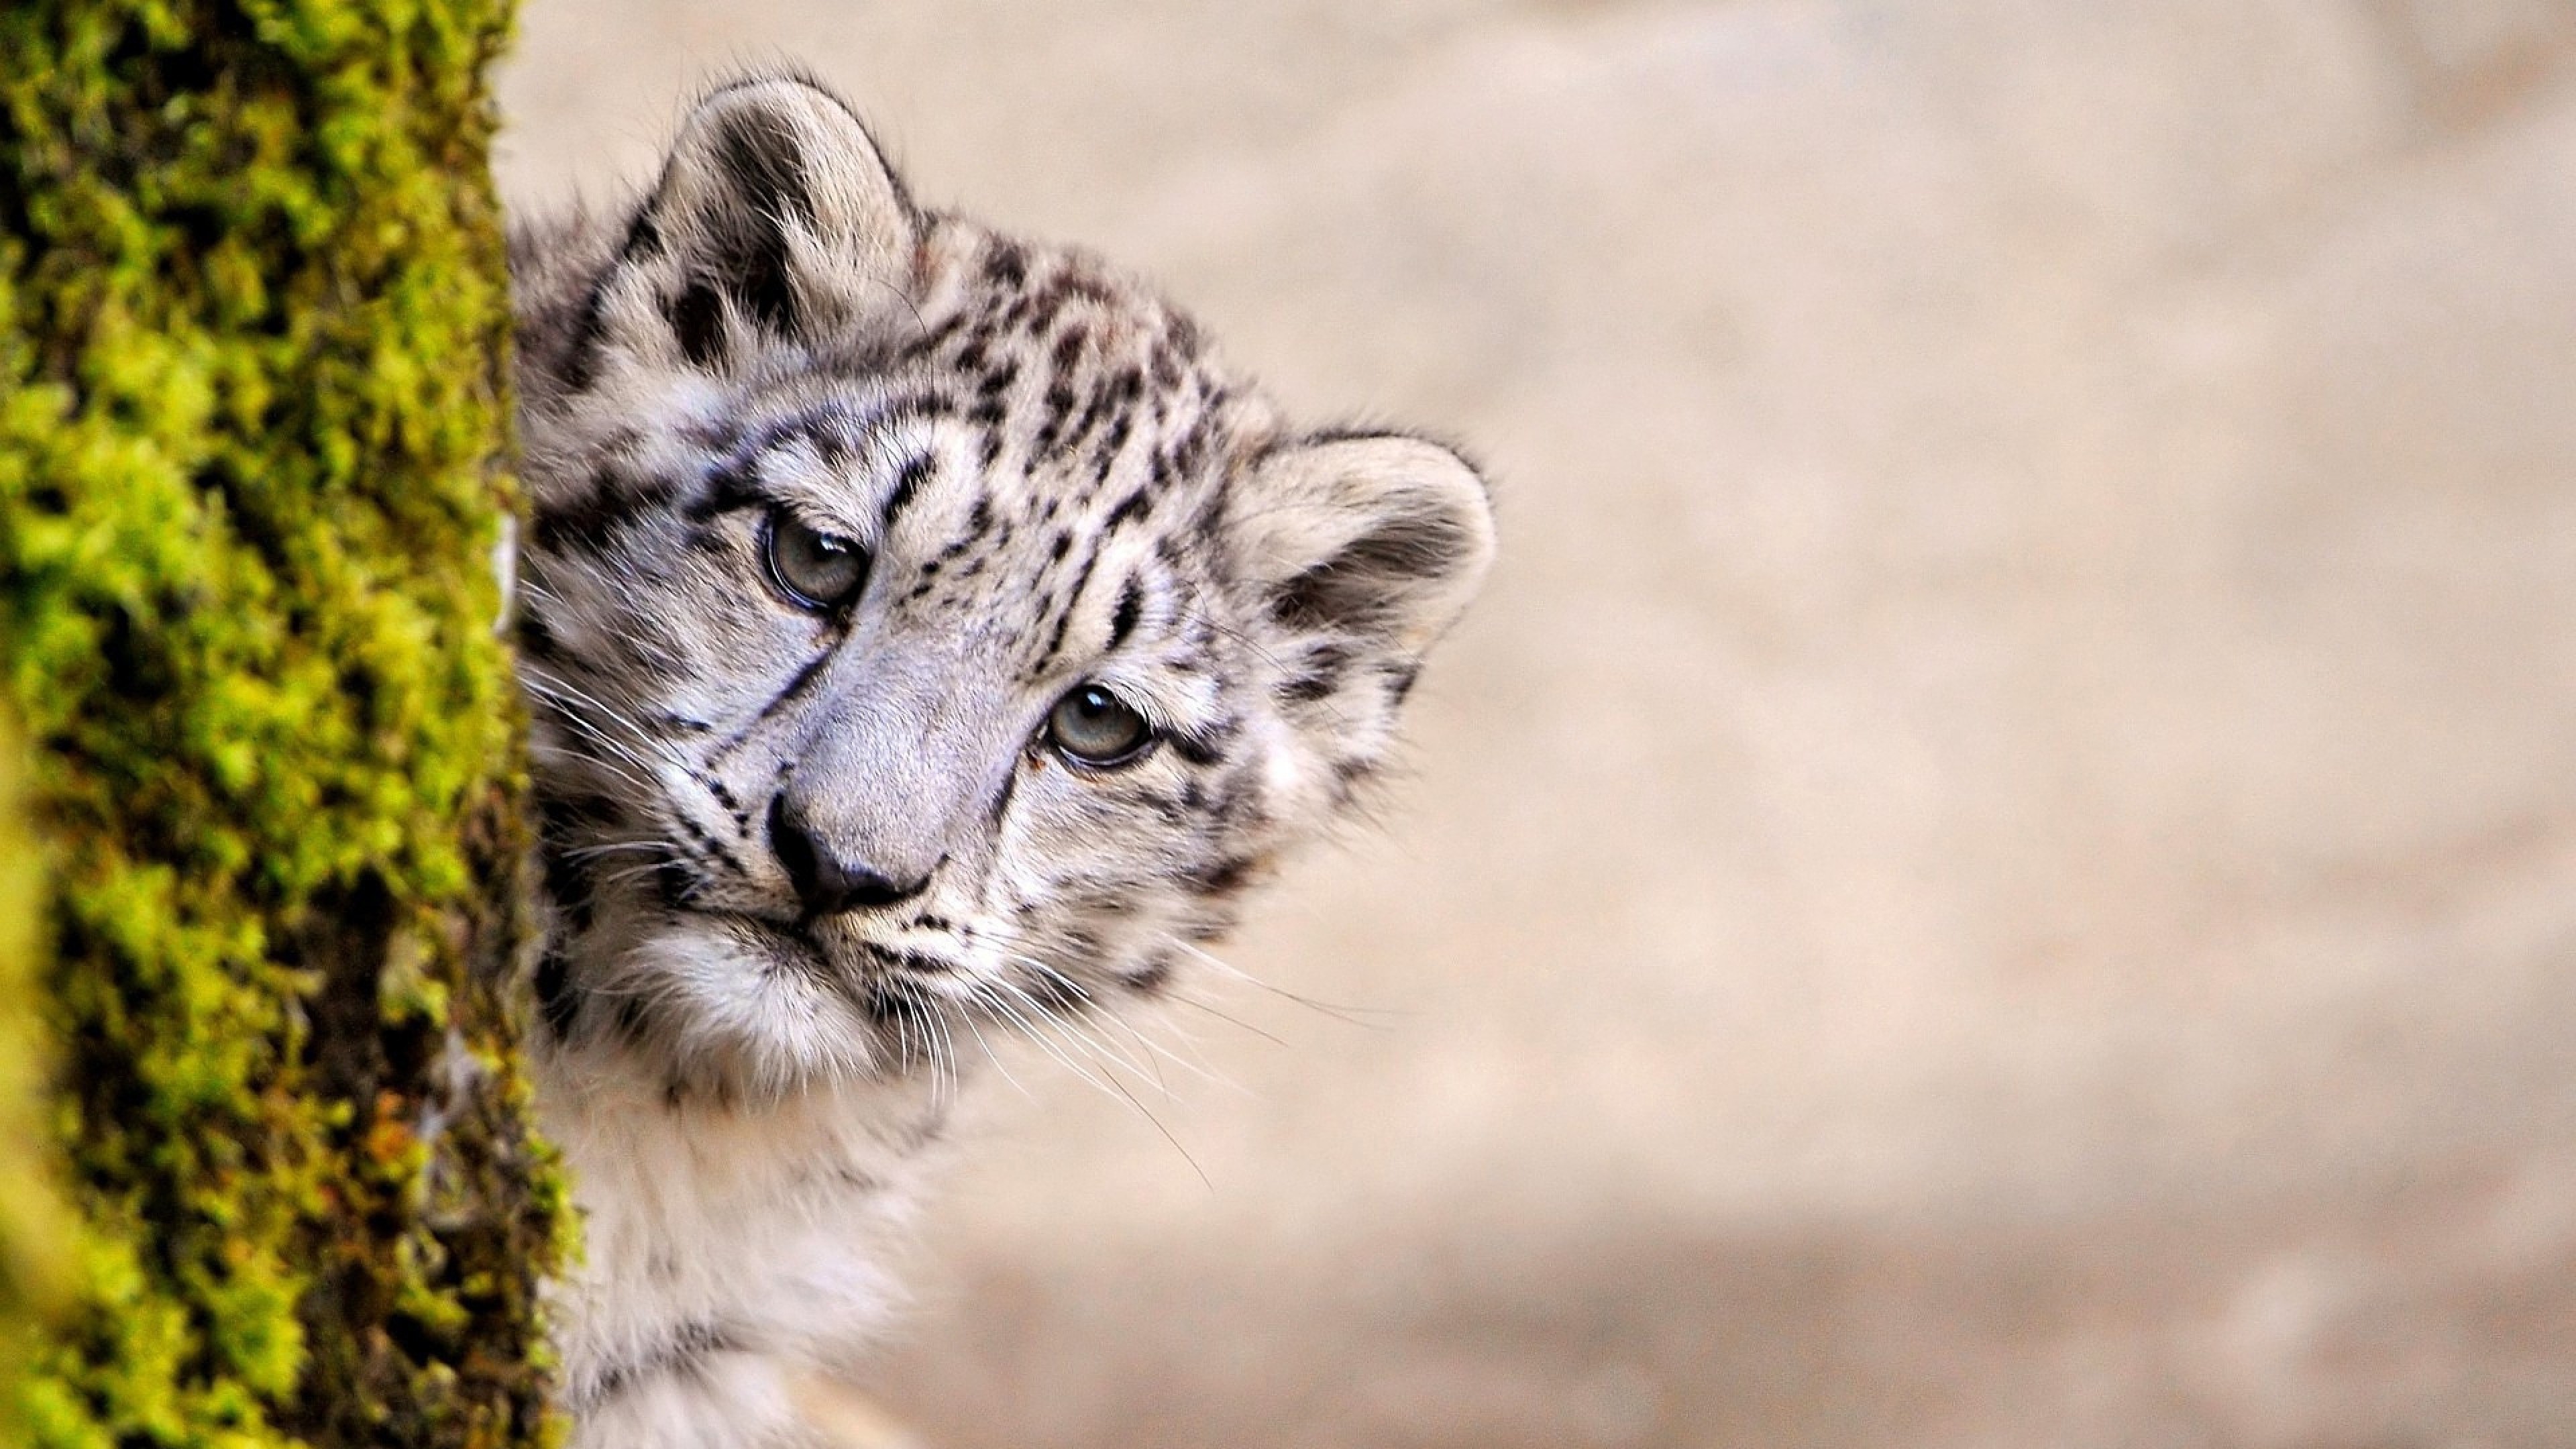 Snow Leopard Young, HD Animals, 4k Wallpaper, Image, Background